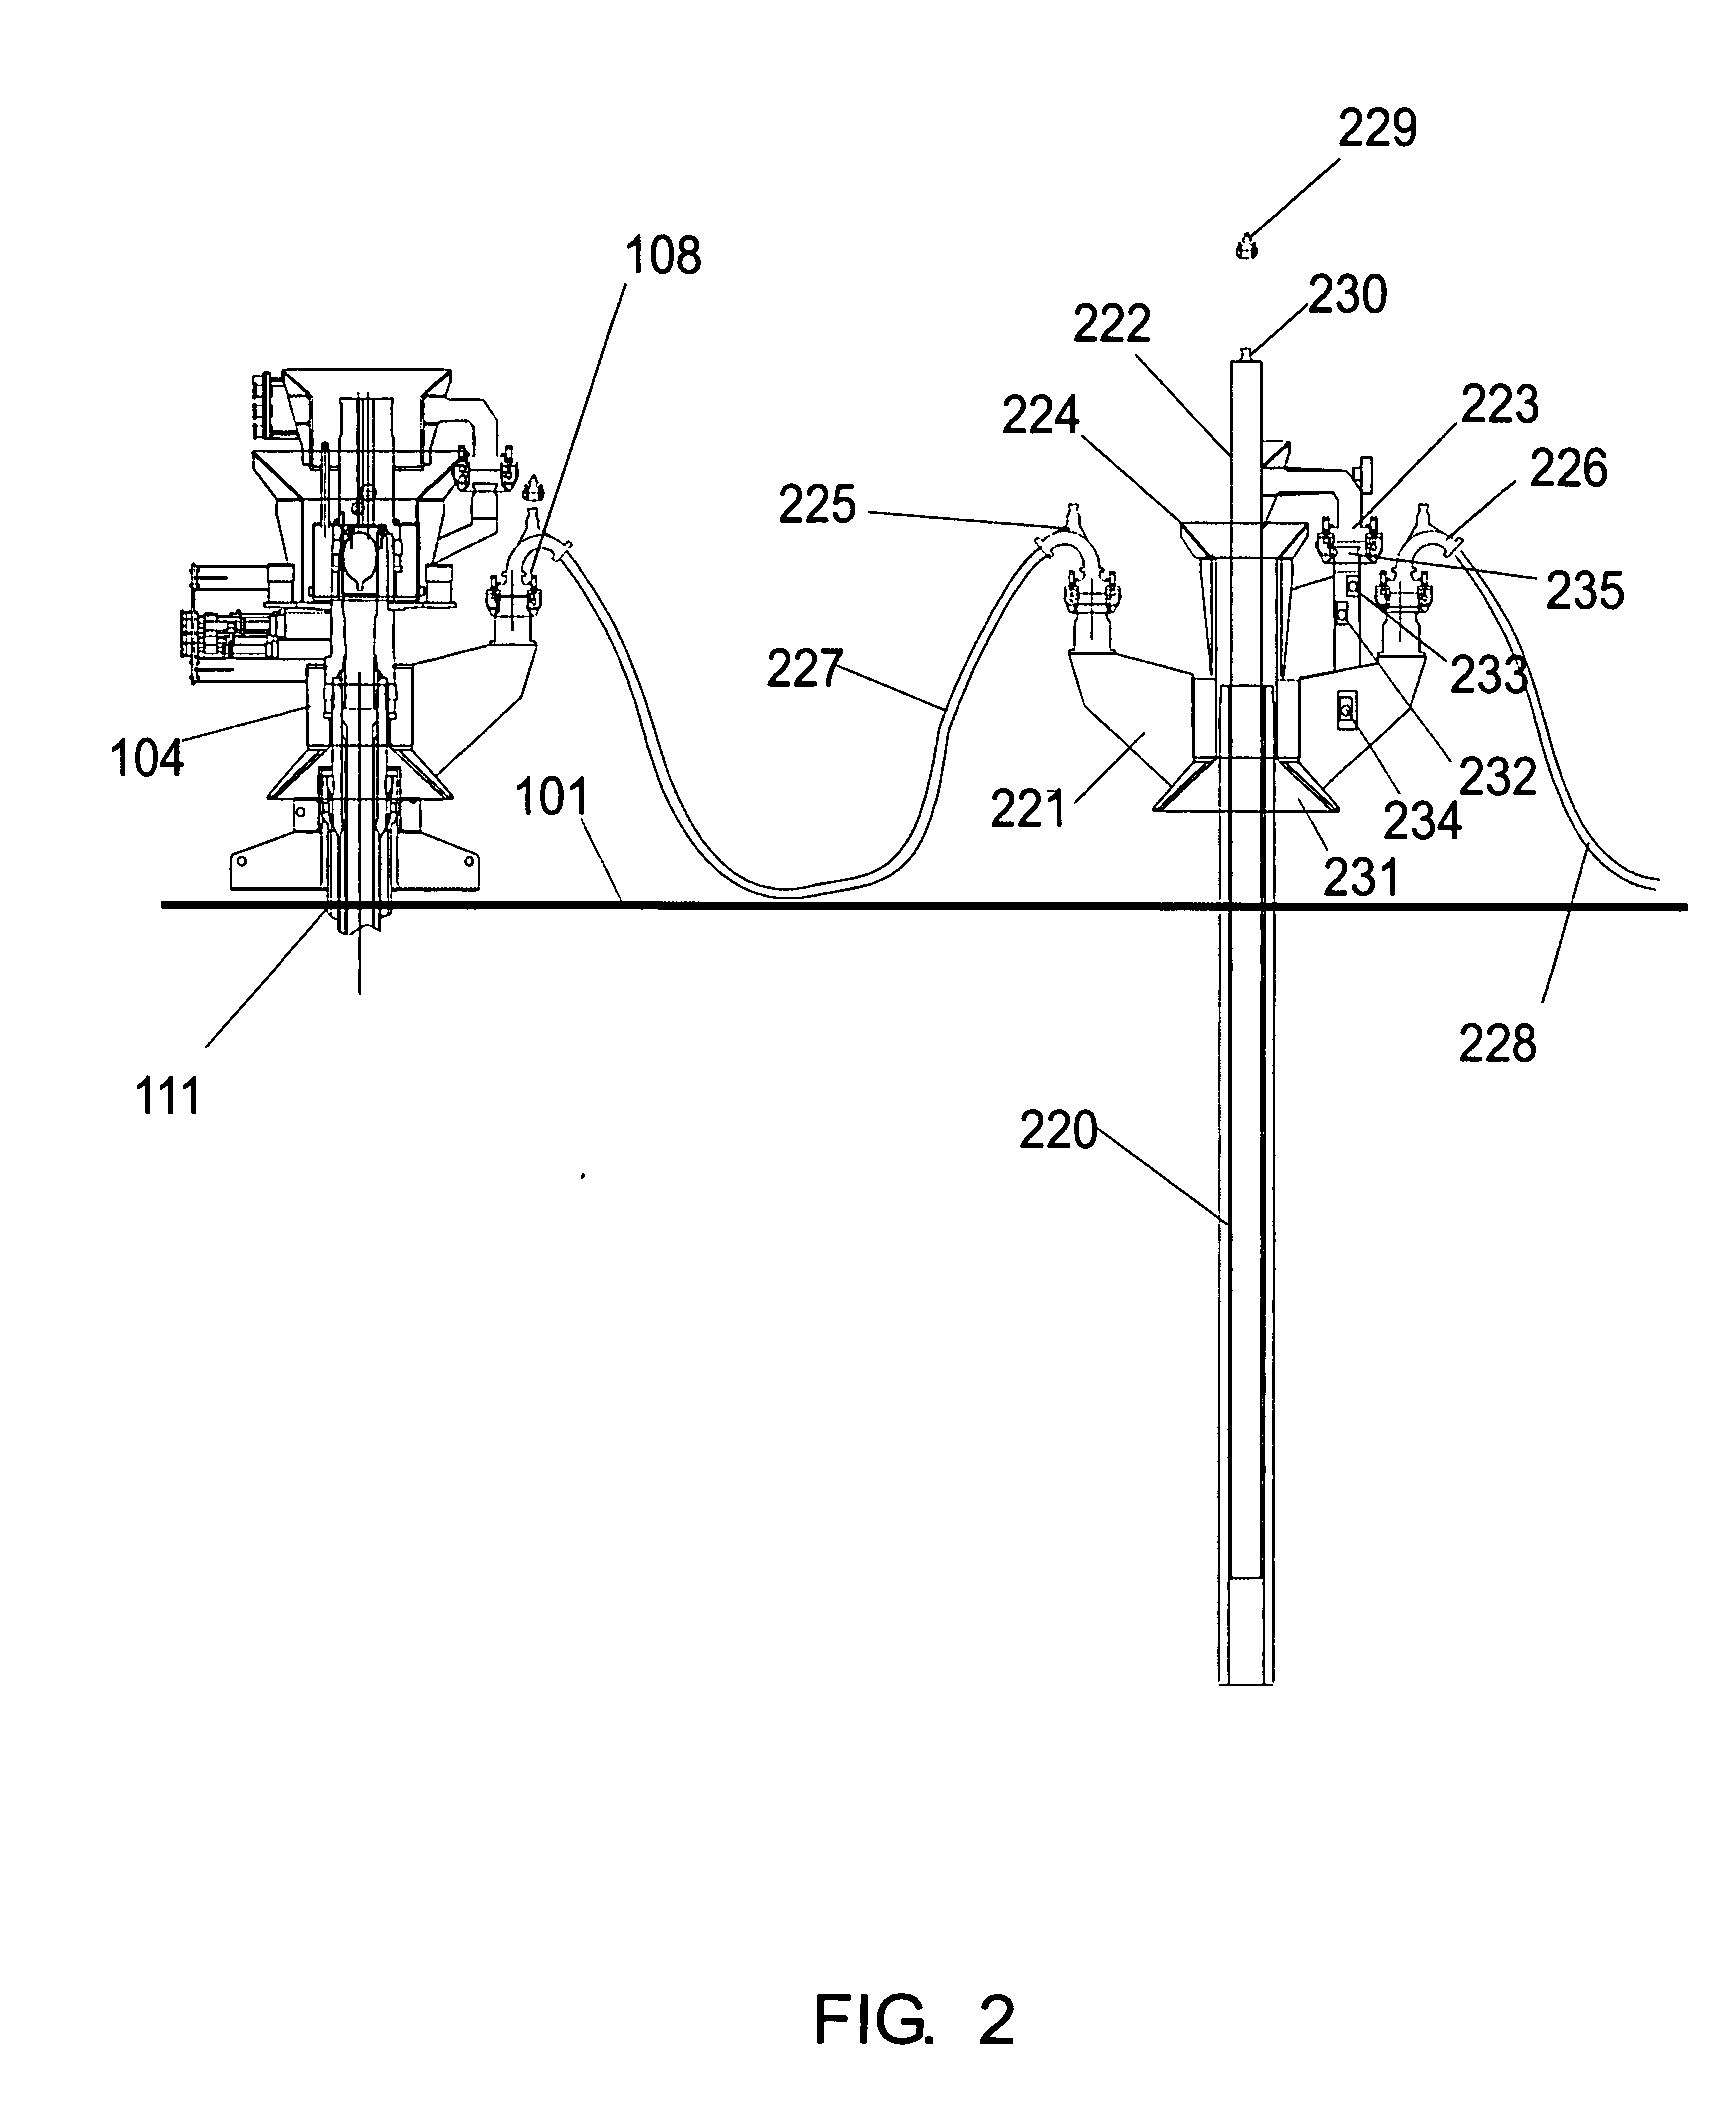 System for direct vertical connection between contiguous subsea equipment and method of installation of said connection